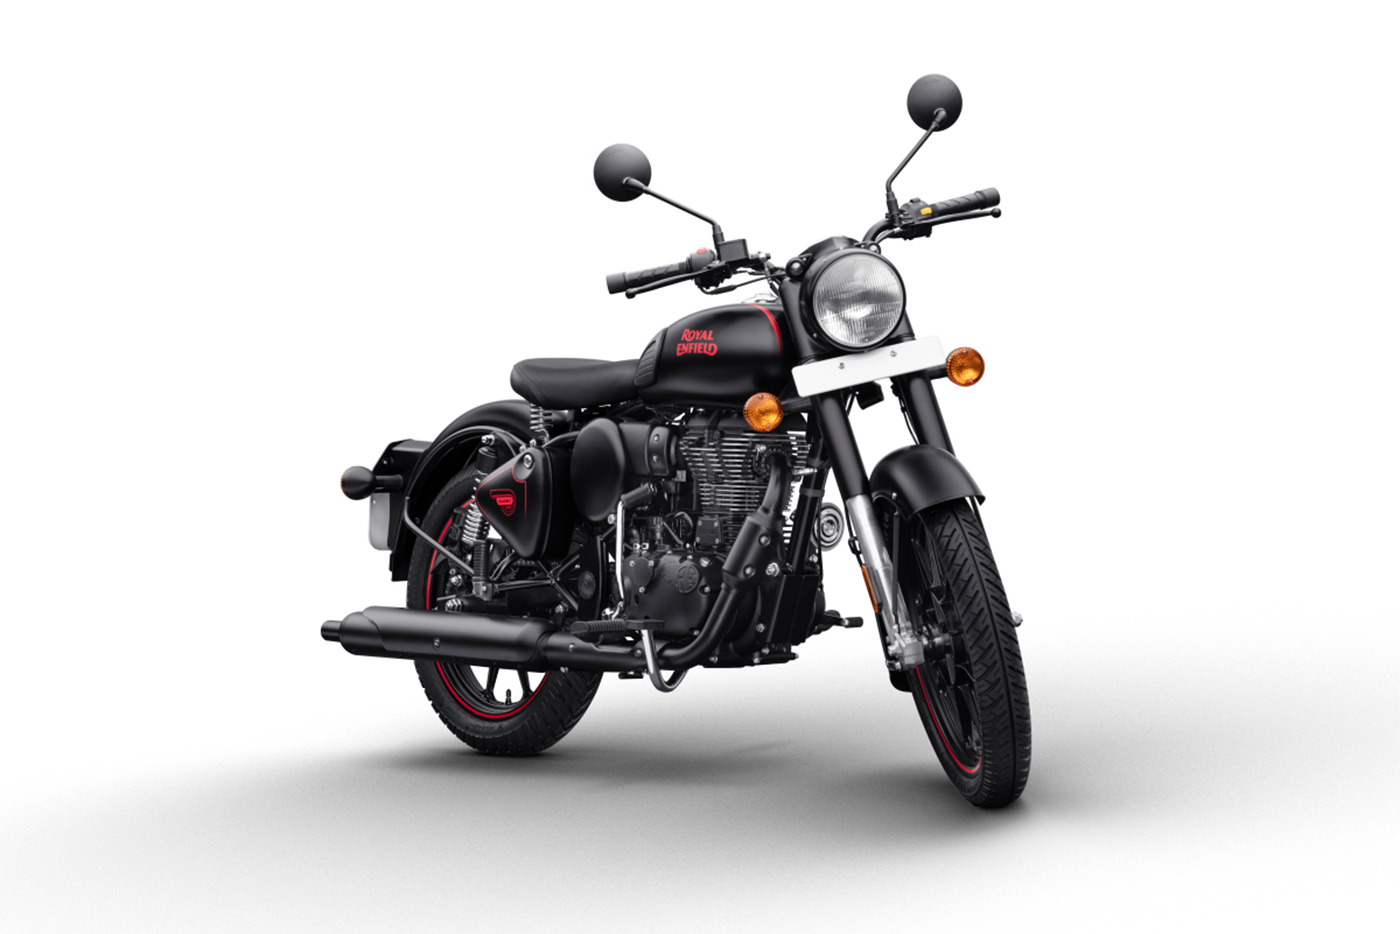 royal-enfield-classic-500-stealth-black-limited-edition-9.jpg